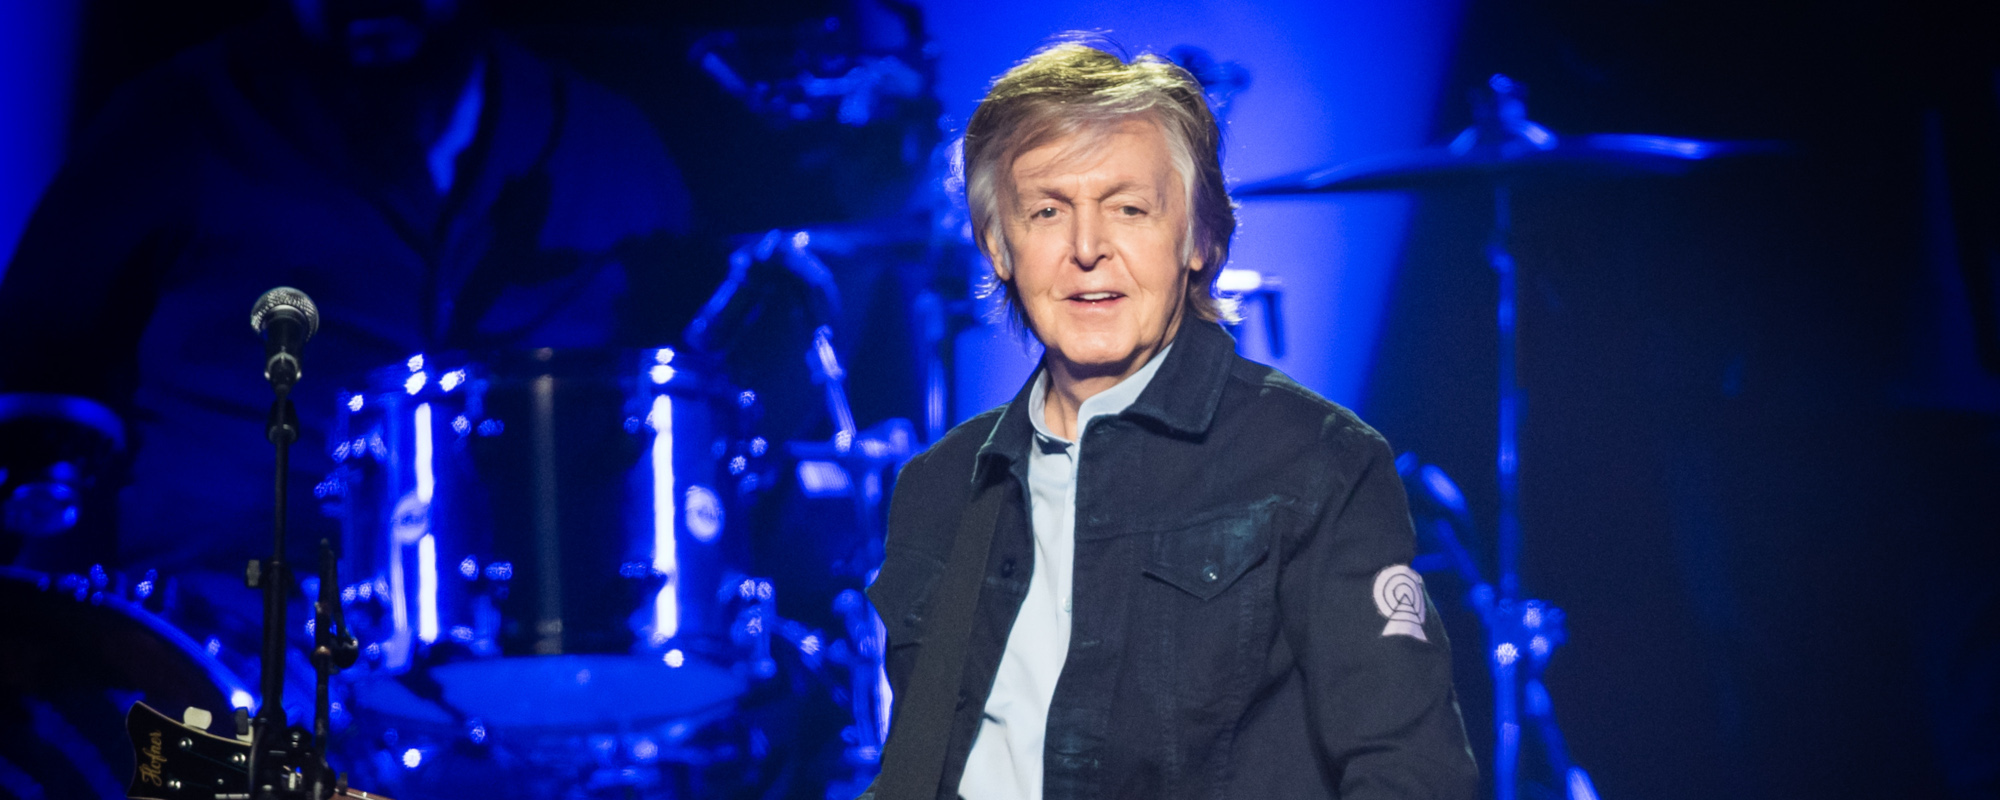 Paul McCartney to Howard Stern: “I Don’t Go and Try and Write a Song Every Day”